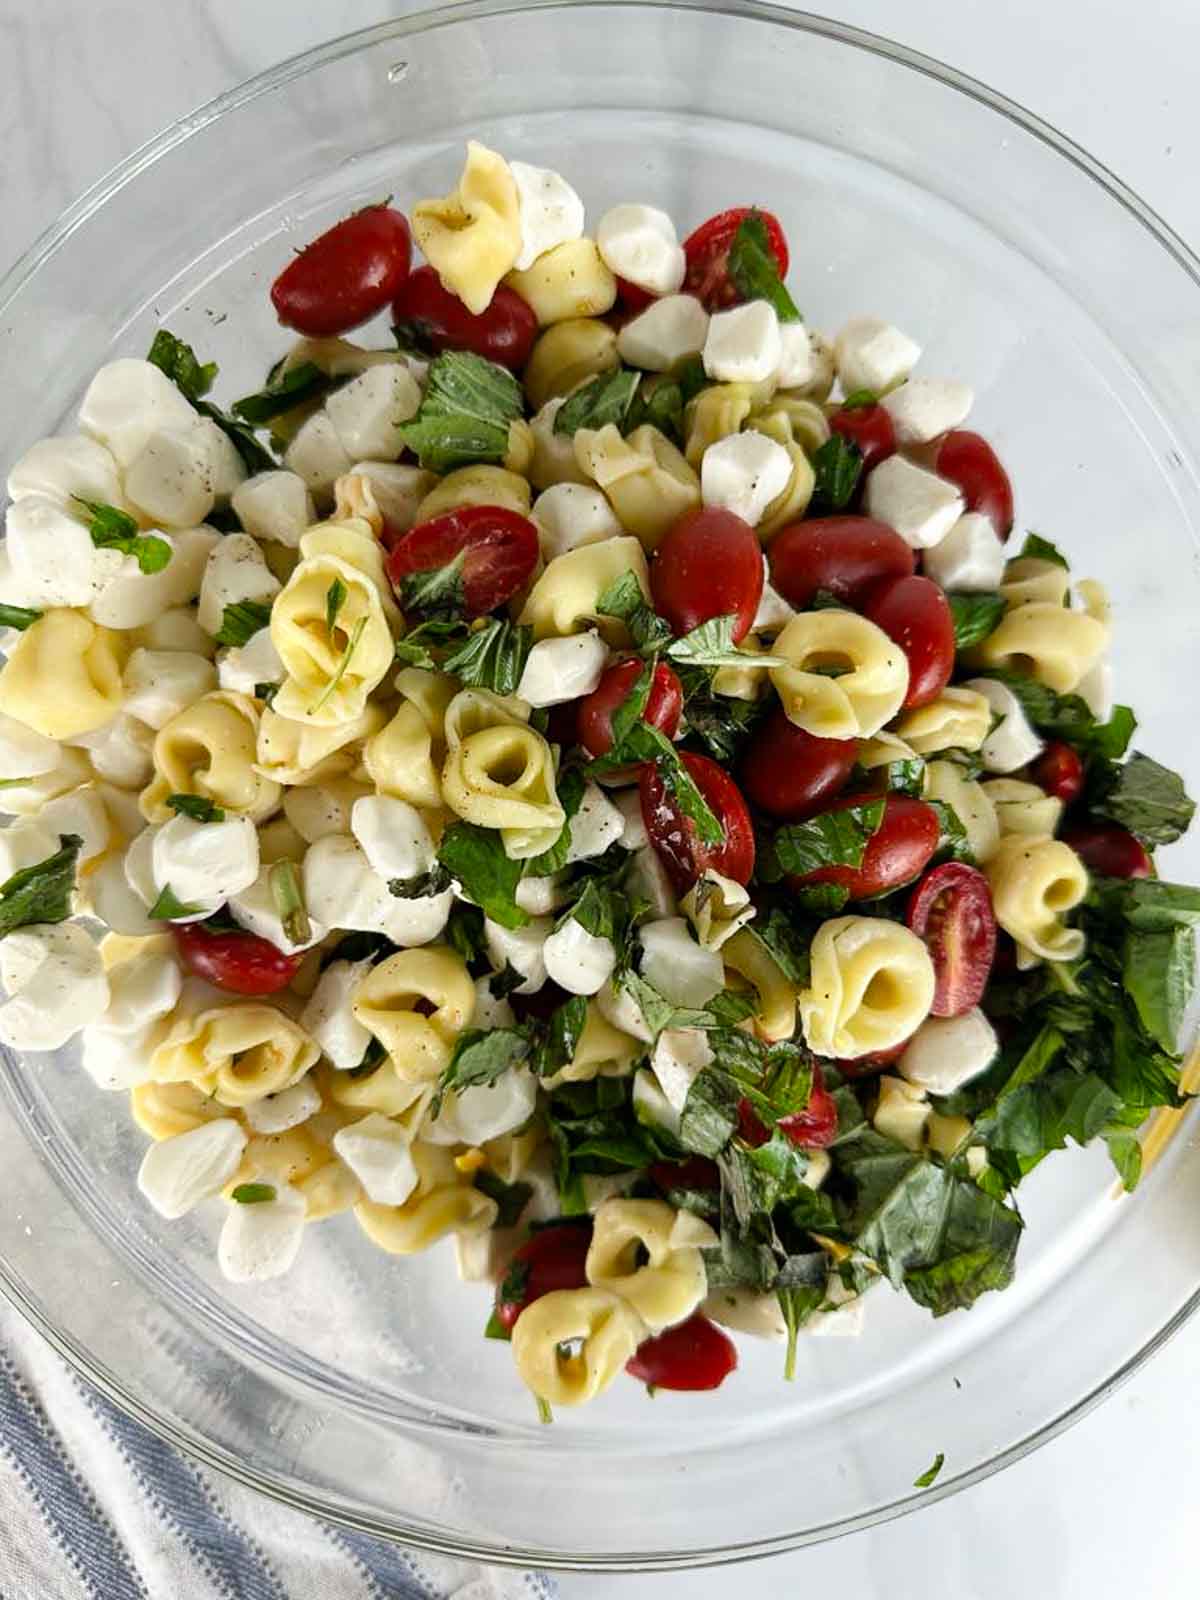 Toss the ingredients for Caprese Tortellini Pasta Salad together in a bowl.